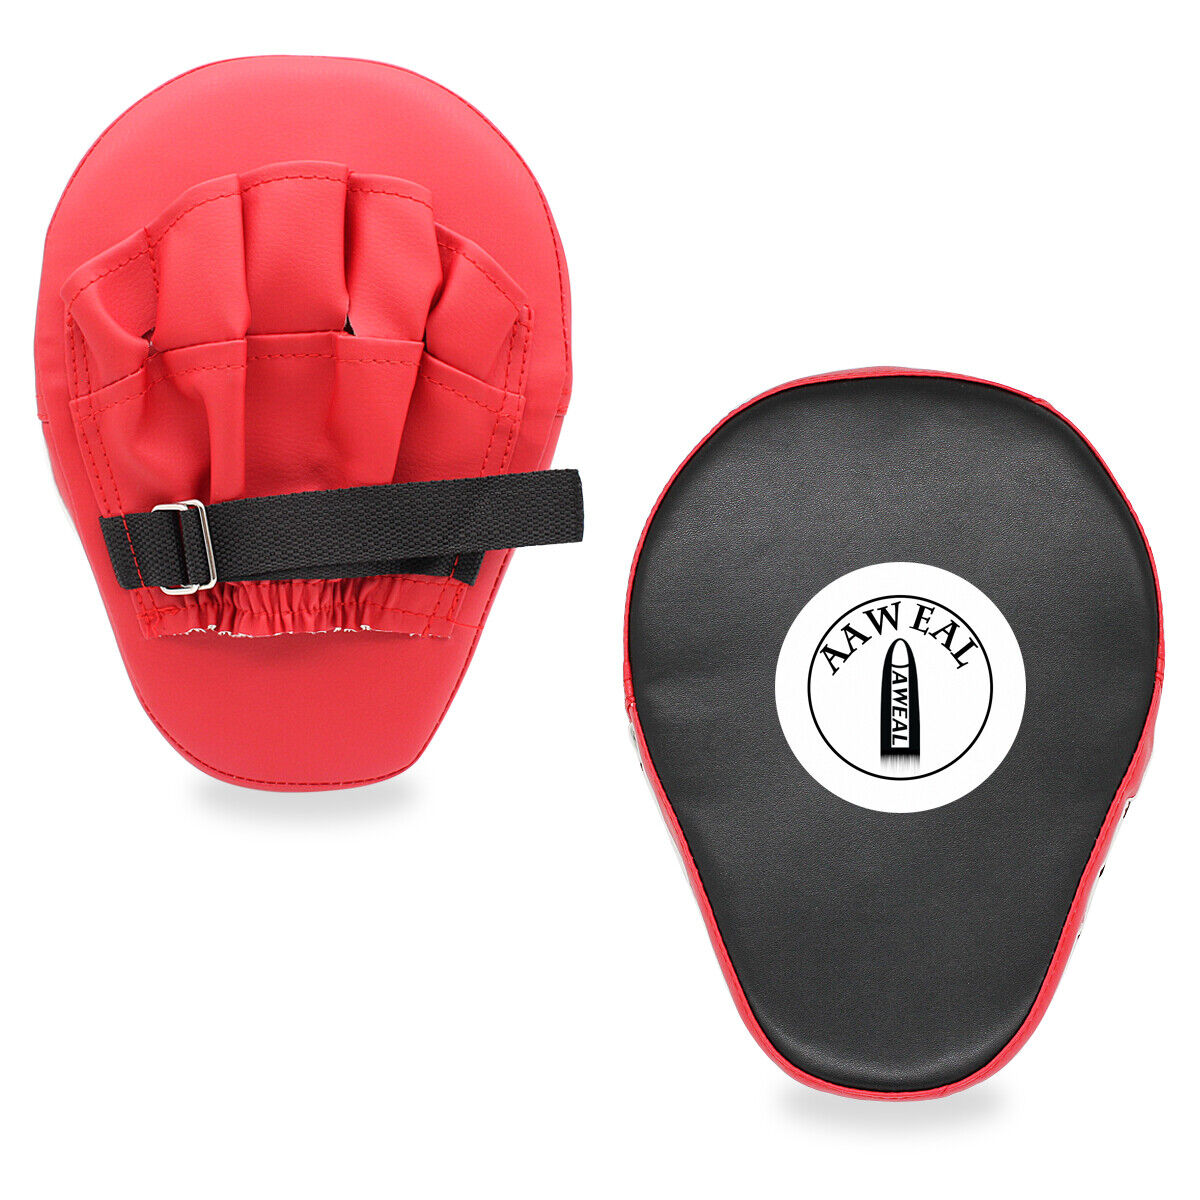 2x Punching Mitts Kickboxing Training Punch MMA Boxing Hand Target Focus Pads Aaweal Does Not Apply - фотография #9